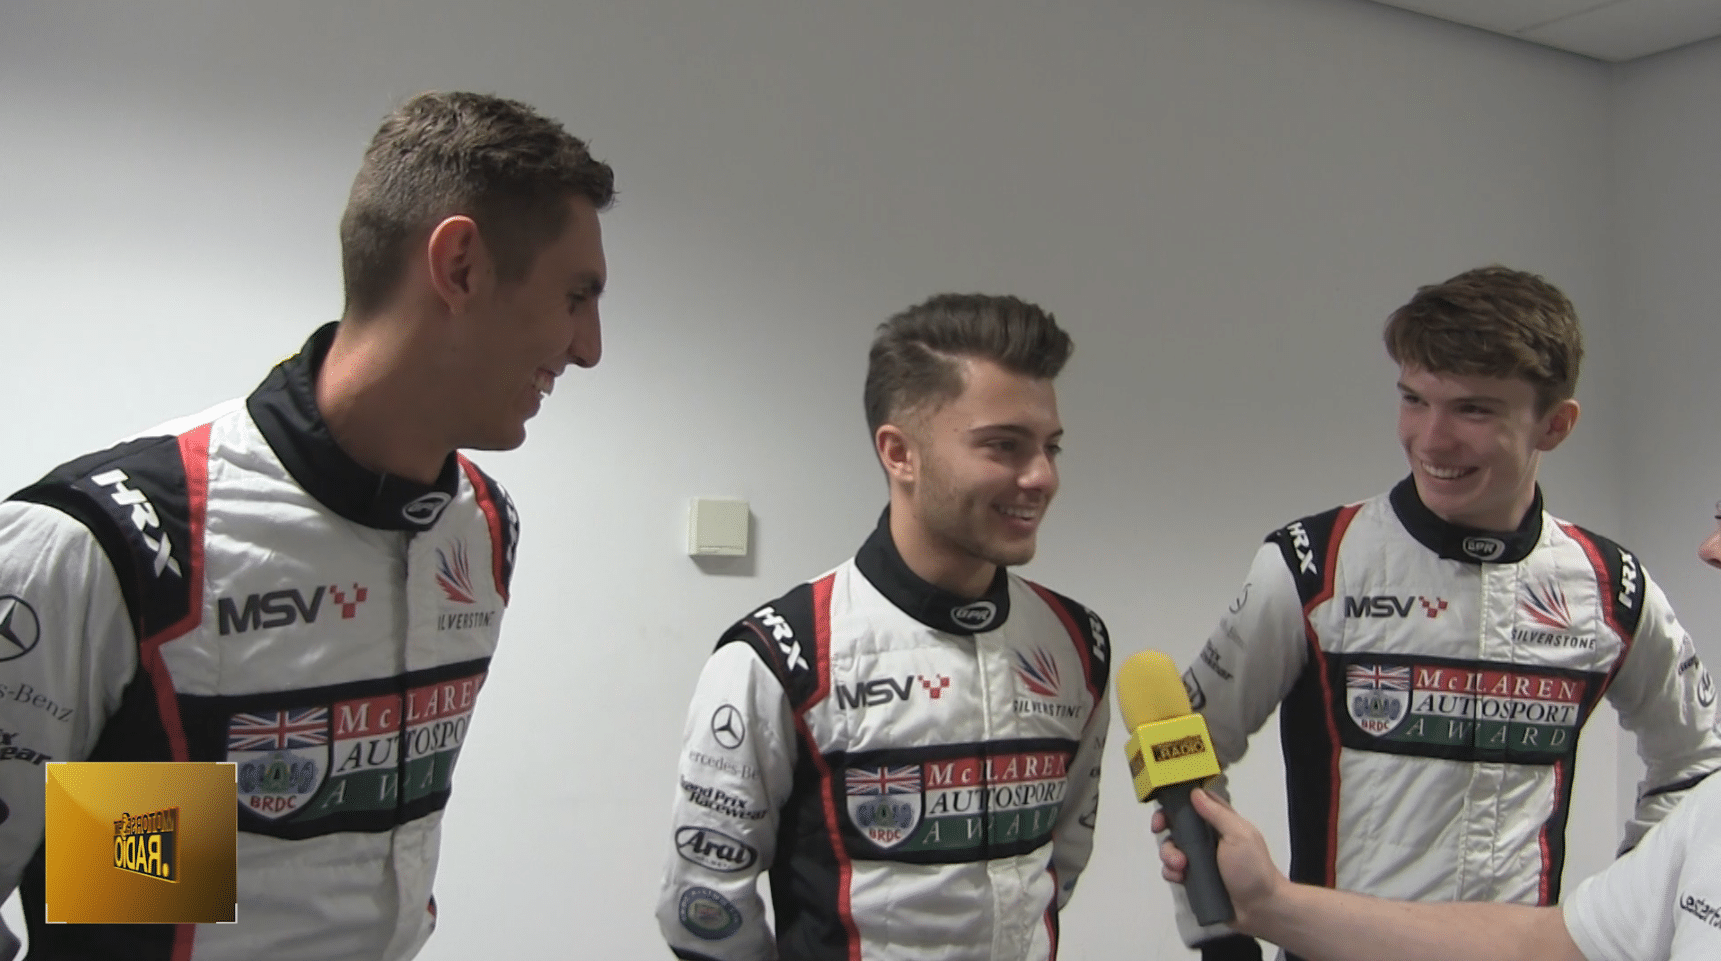 Interview with the McLaren Autosport BRDC drivers